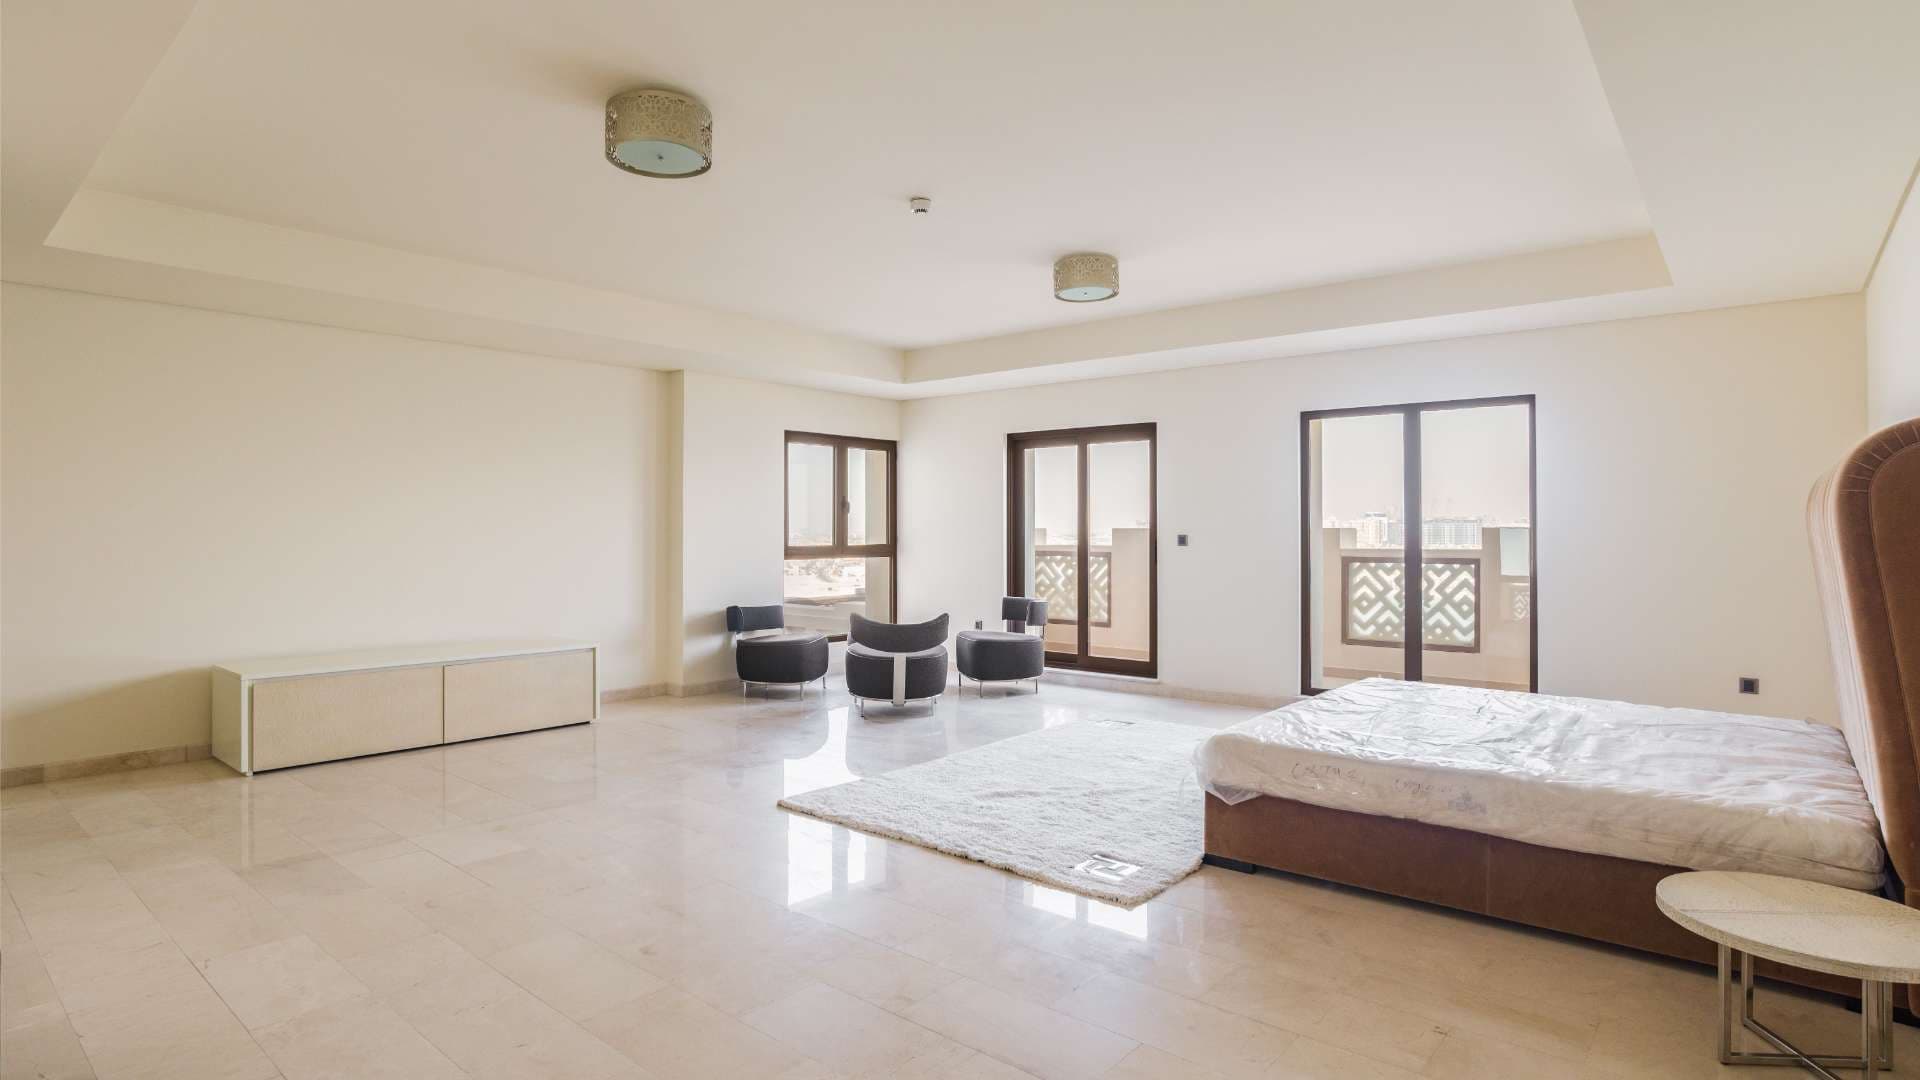 6 Bedroom Penthouse For Sale Balqis Residence Lp06979 7856824e3857a40.jpeg